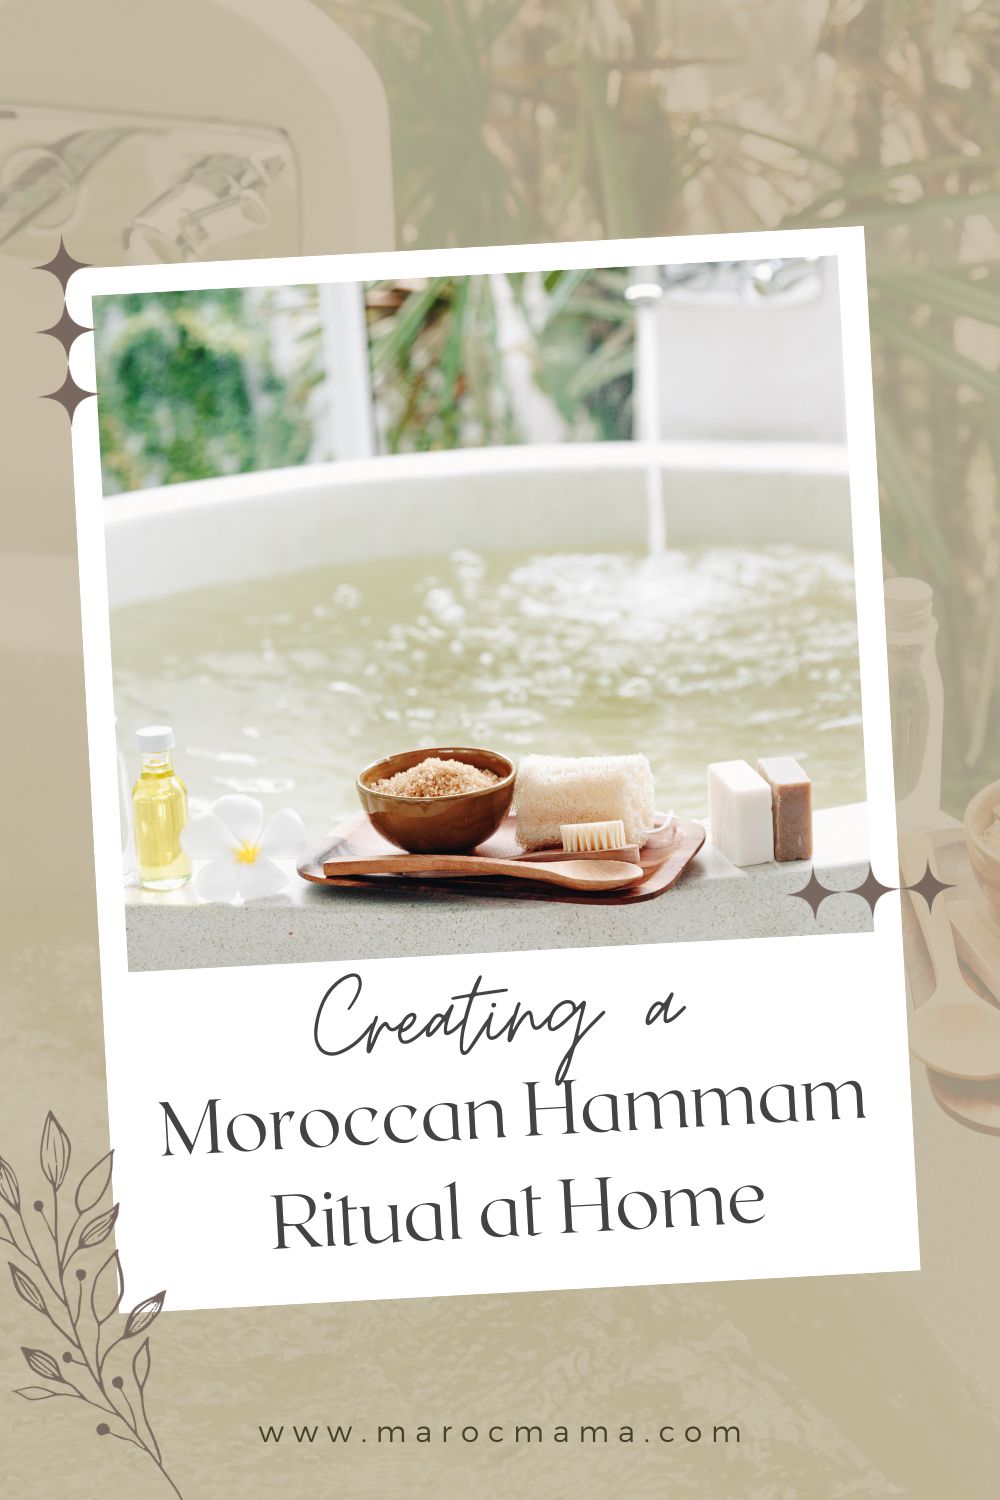 Creating a Moroccan Hammam at home